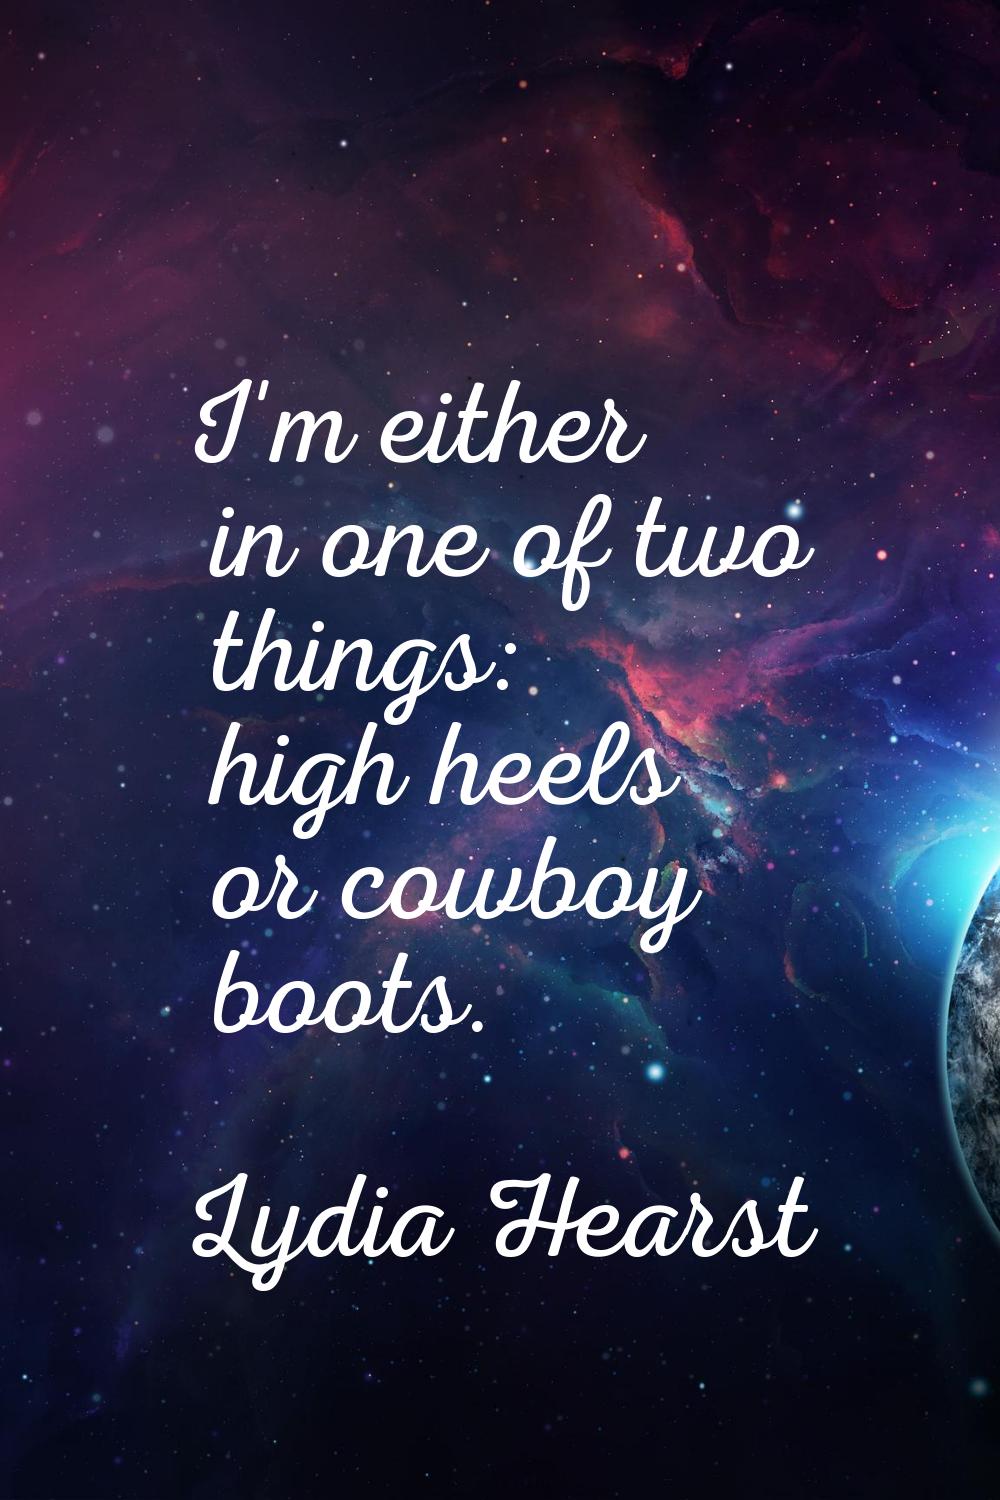 I'm either in one of two things: high heels or cowboy boots.